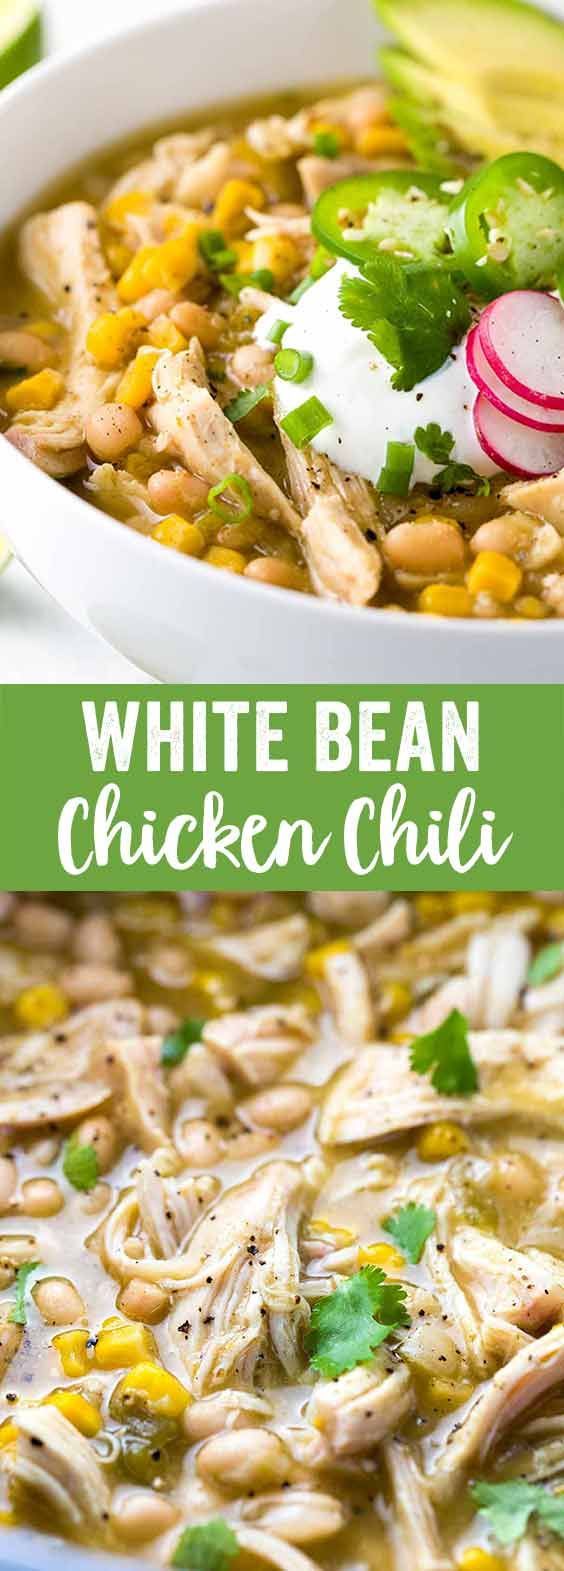 White bean chicken chili prepared in a crockpot with whole roasted jalapenos, tender beans, corn, and lean chicken breast.